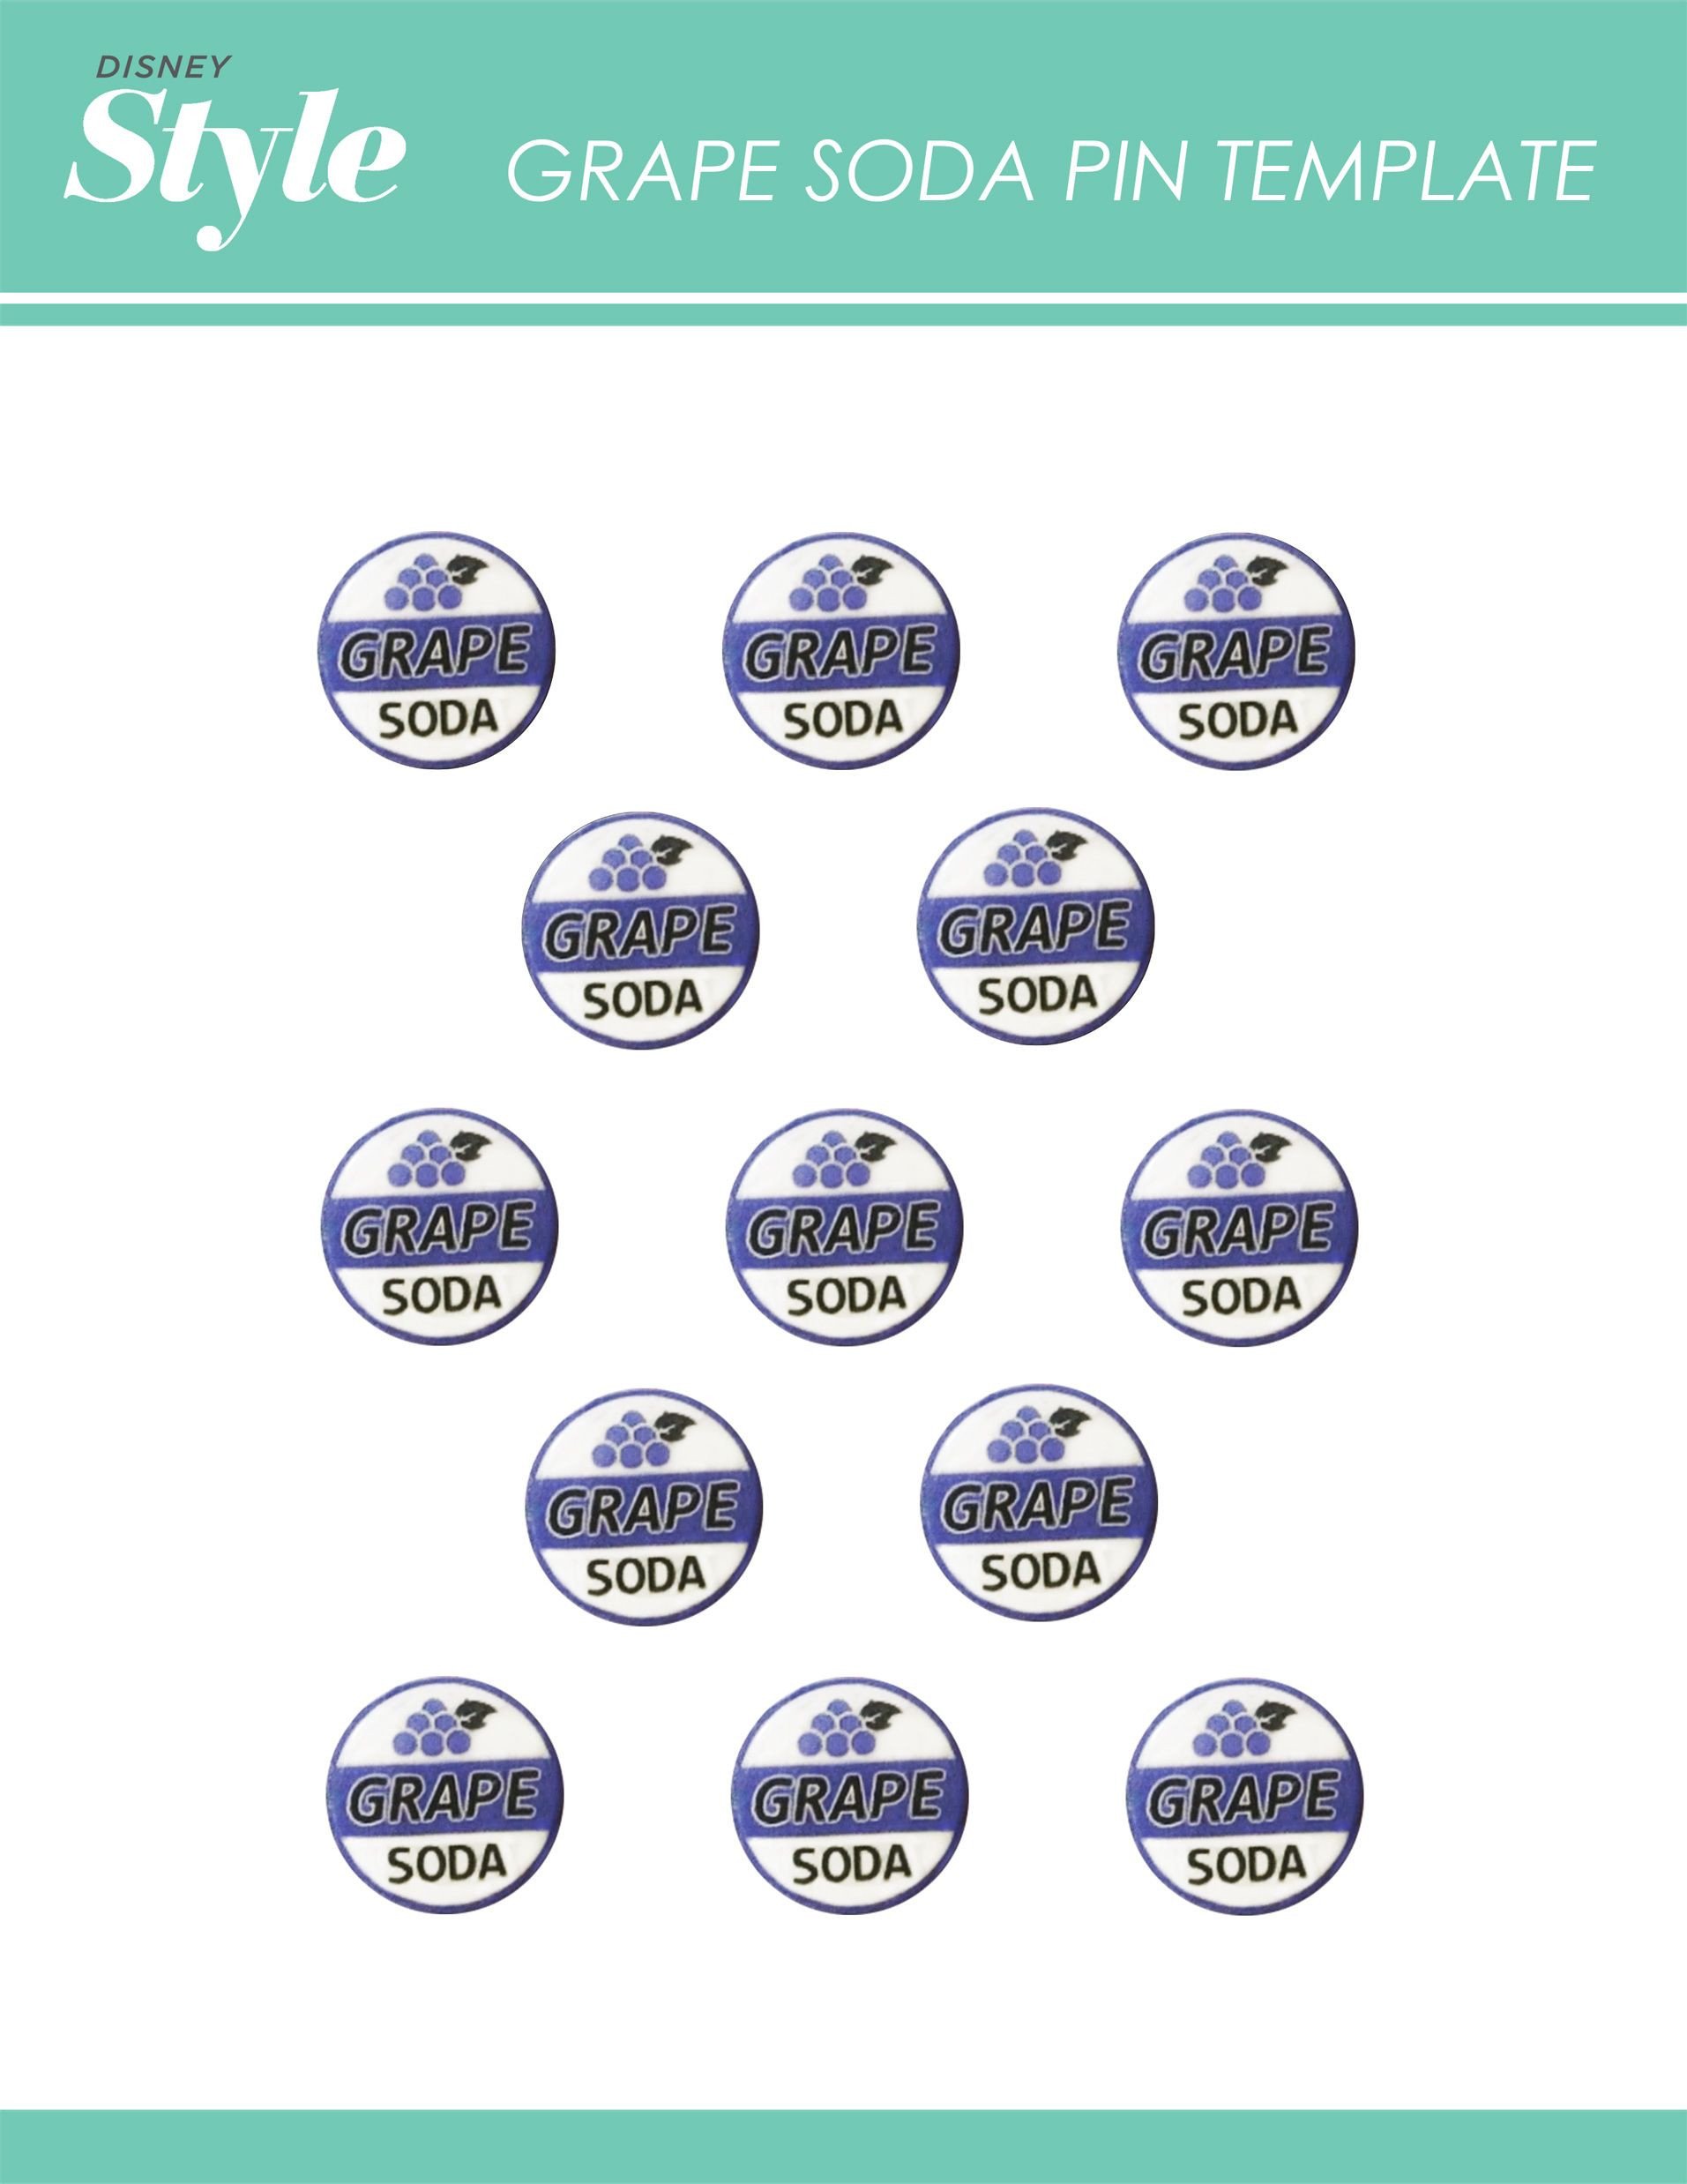 Up Movie Night Printable Templates for Grape Soda Pin and